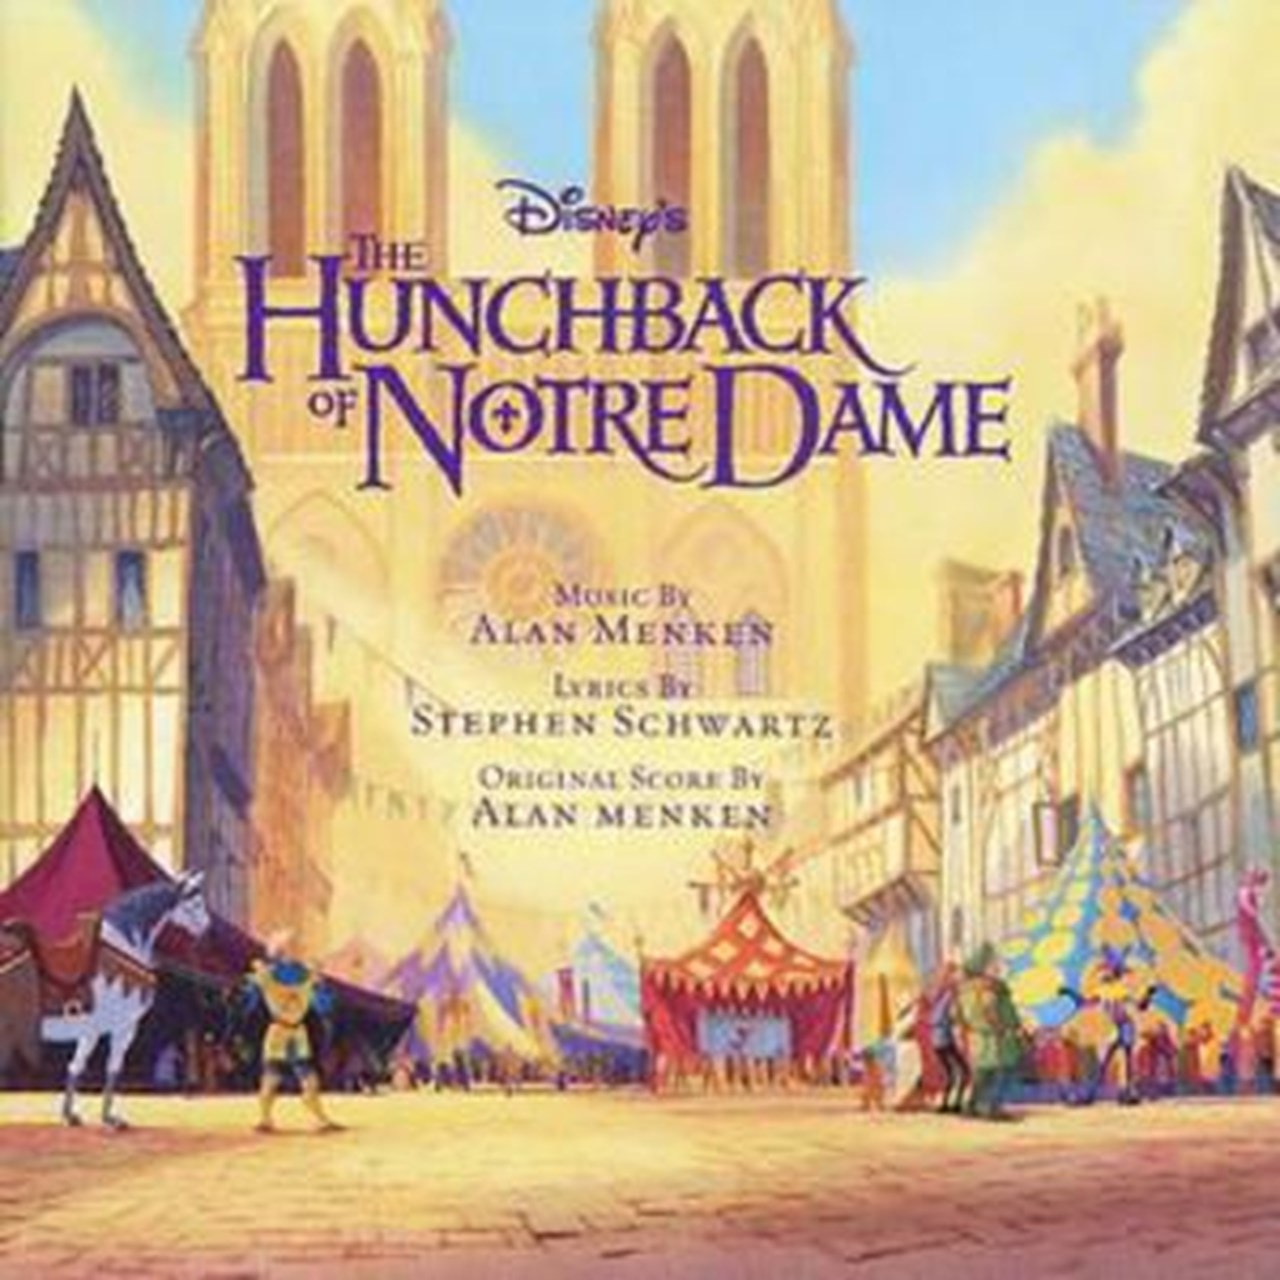 The Hunchback of Notre Dame | CD Album | Free shipping over £20 | HMV Store